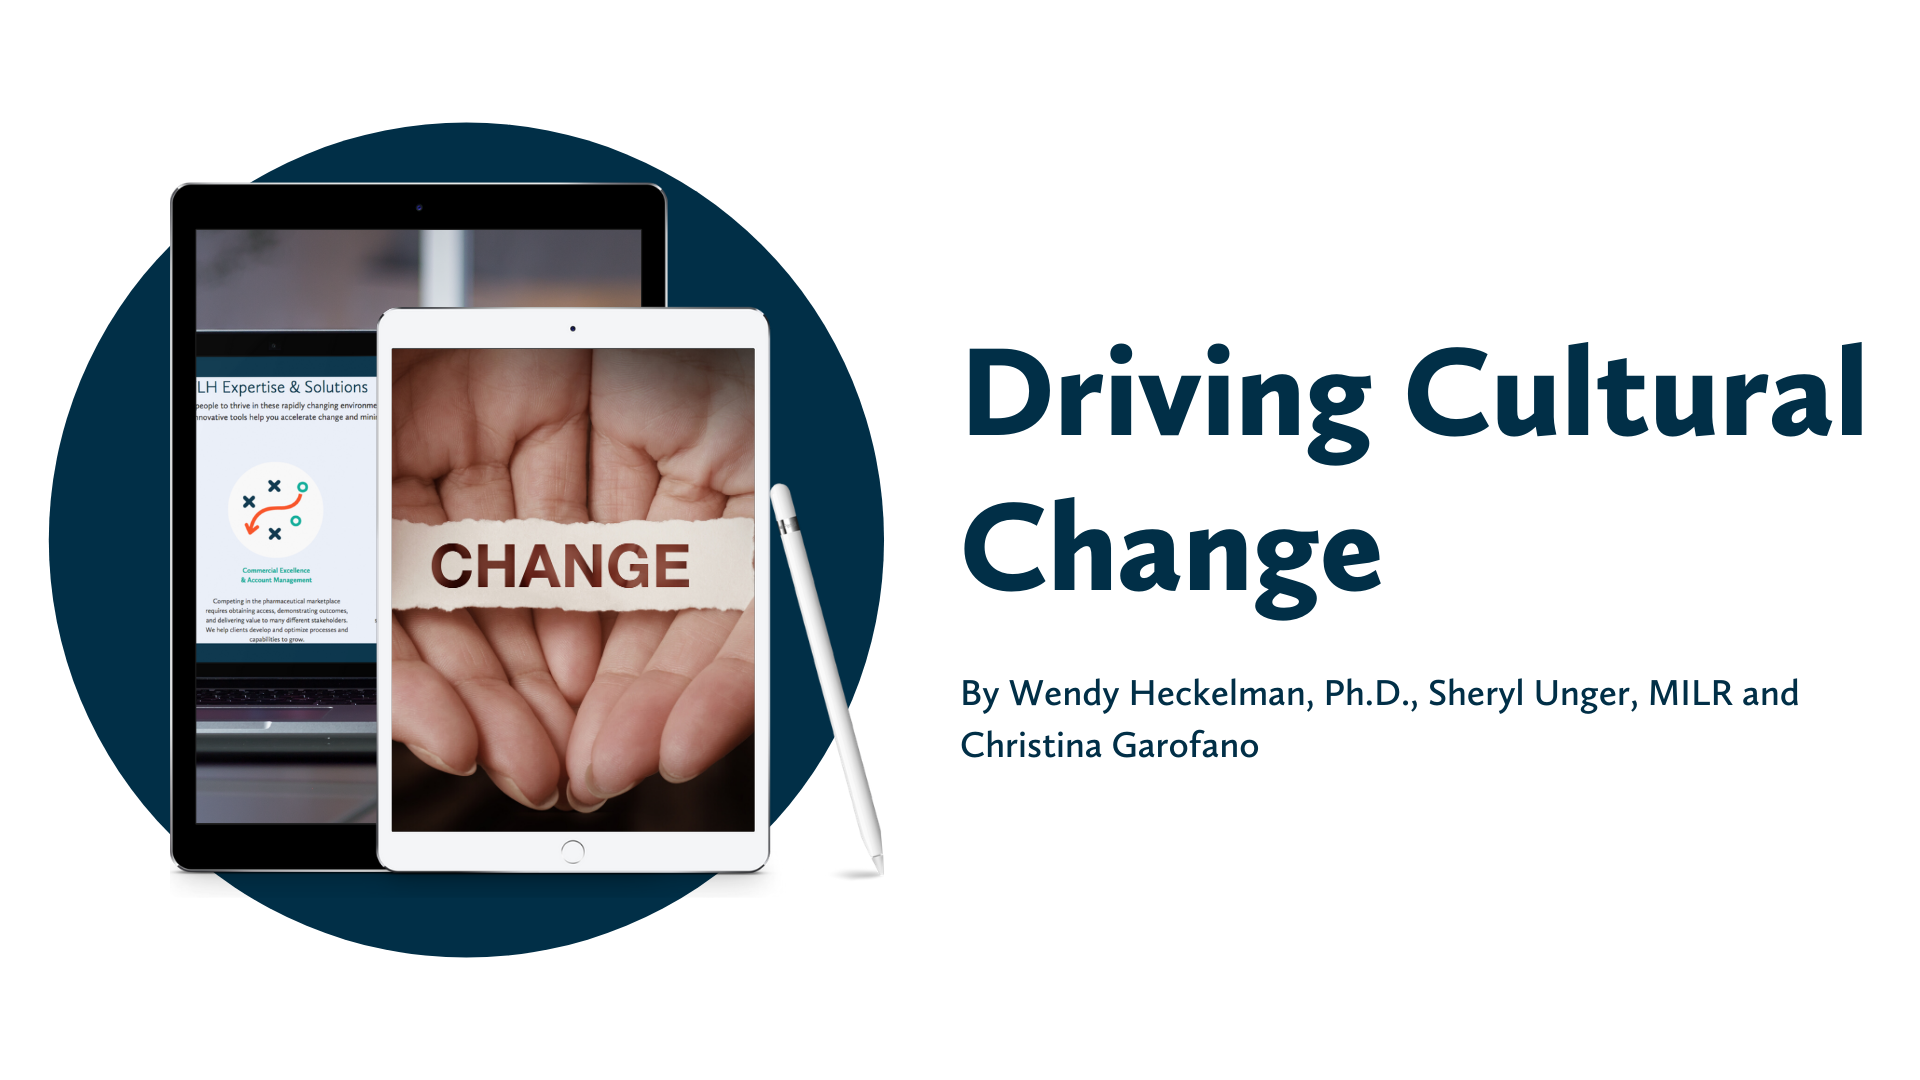 Driving Culture and Change